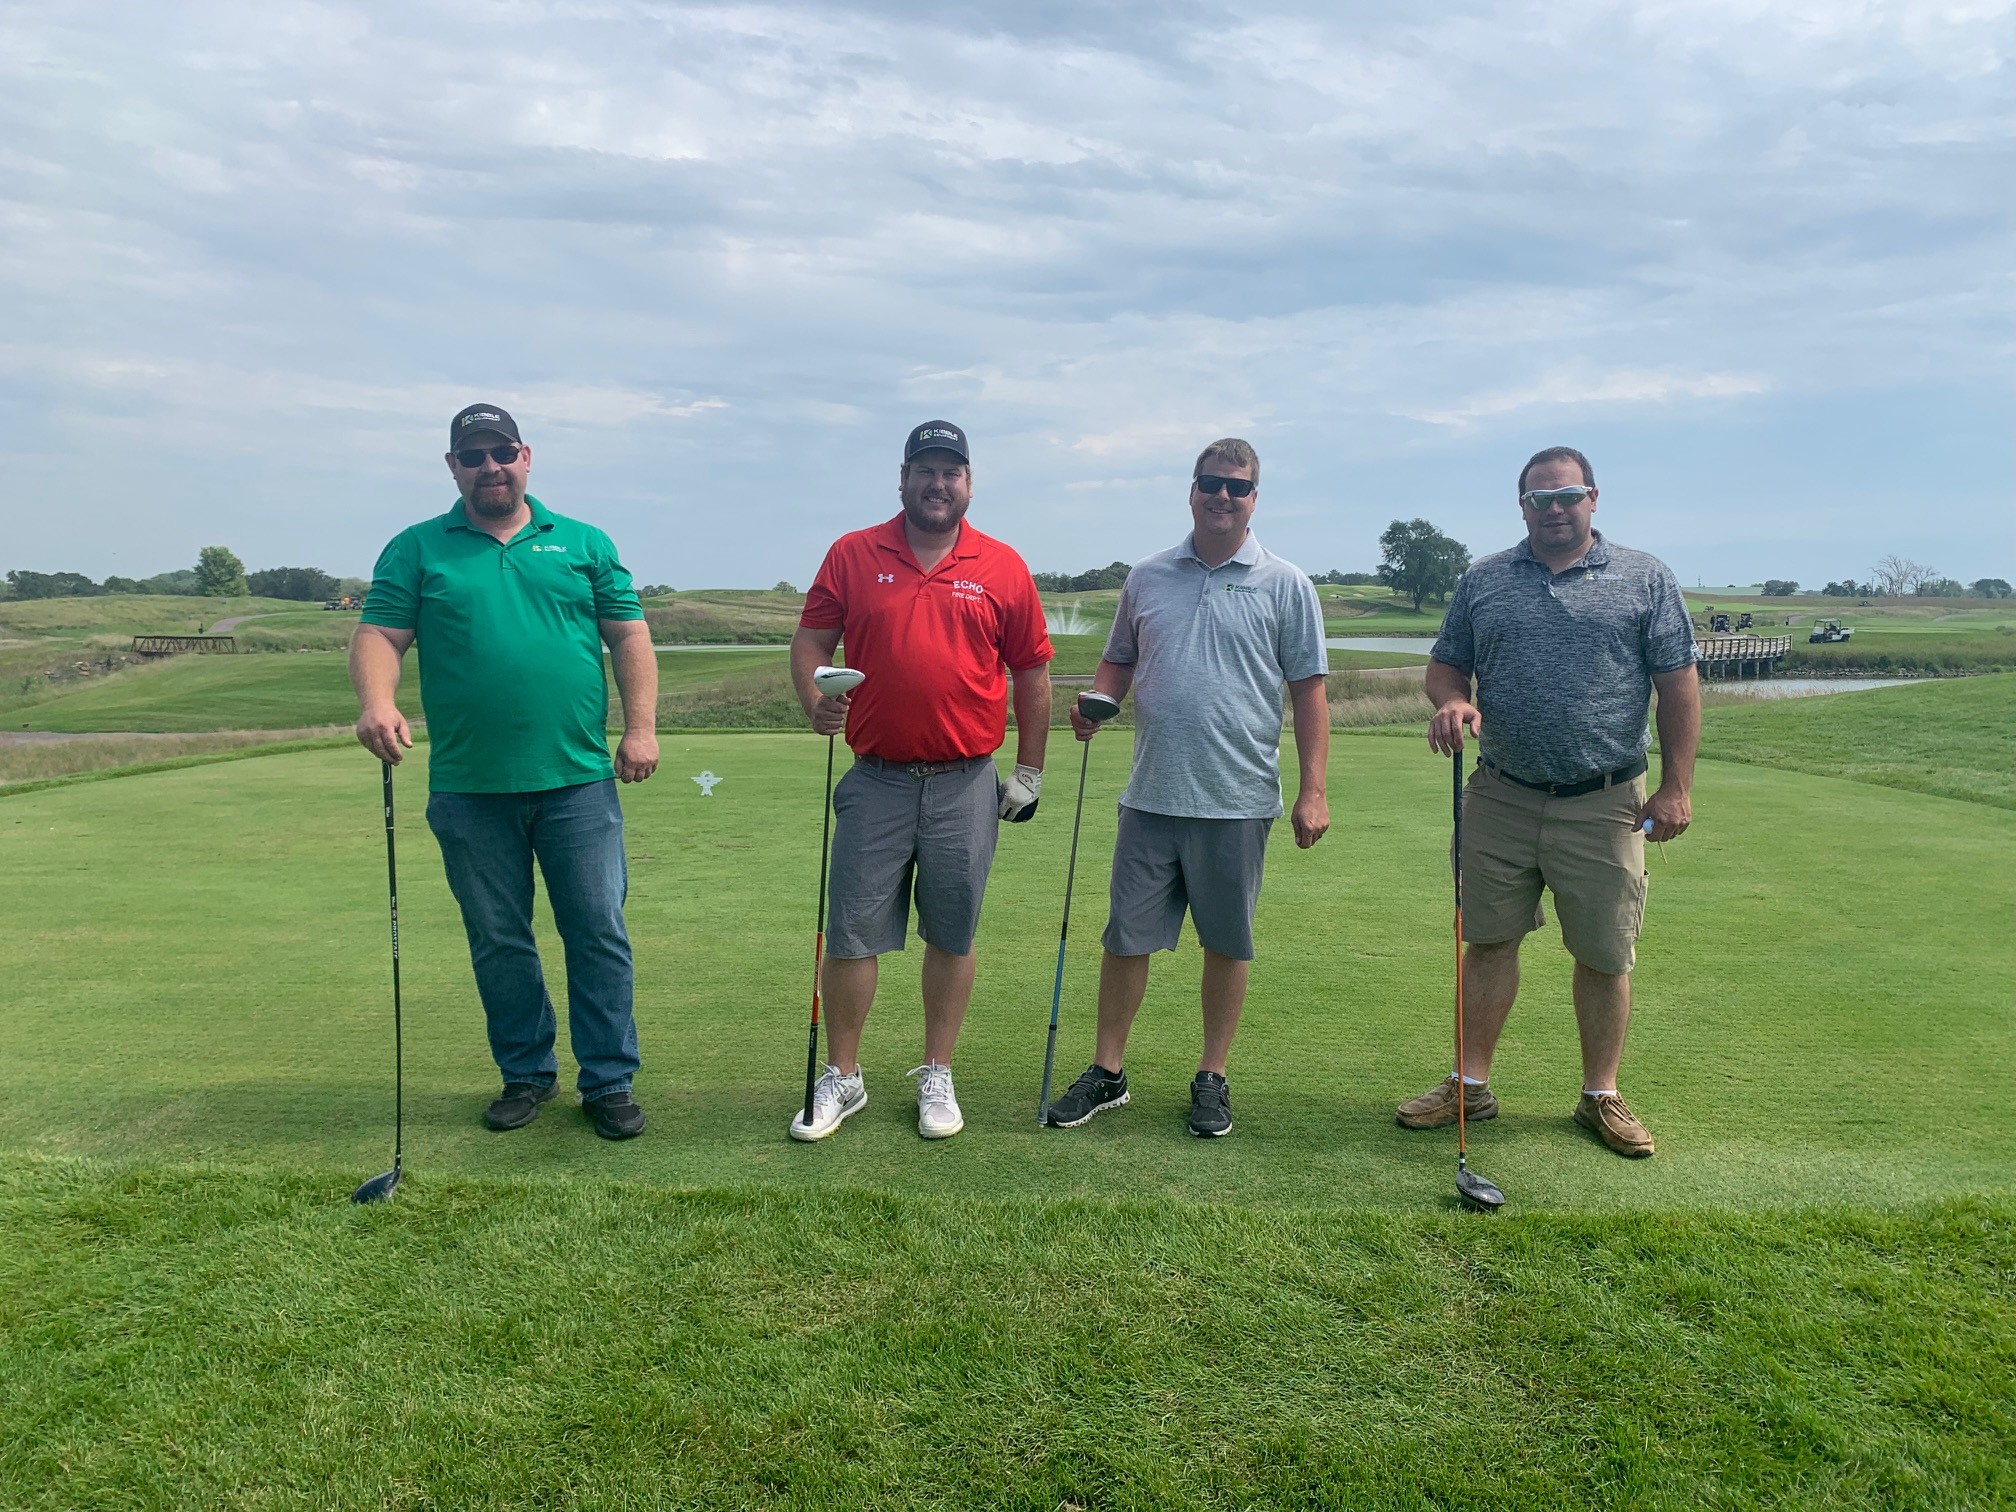 Highest Team Score - 2022 Golf Outing